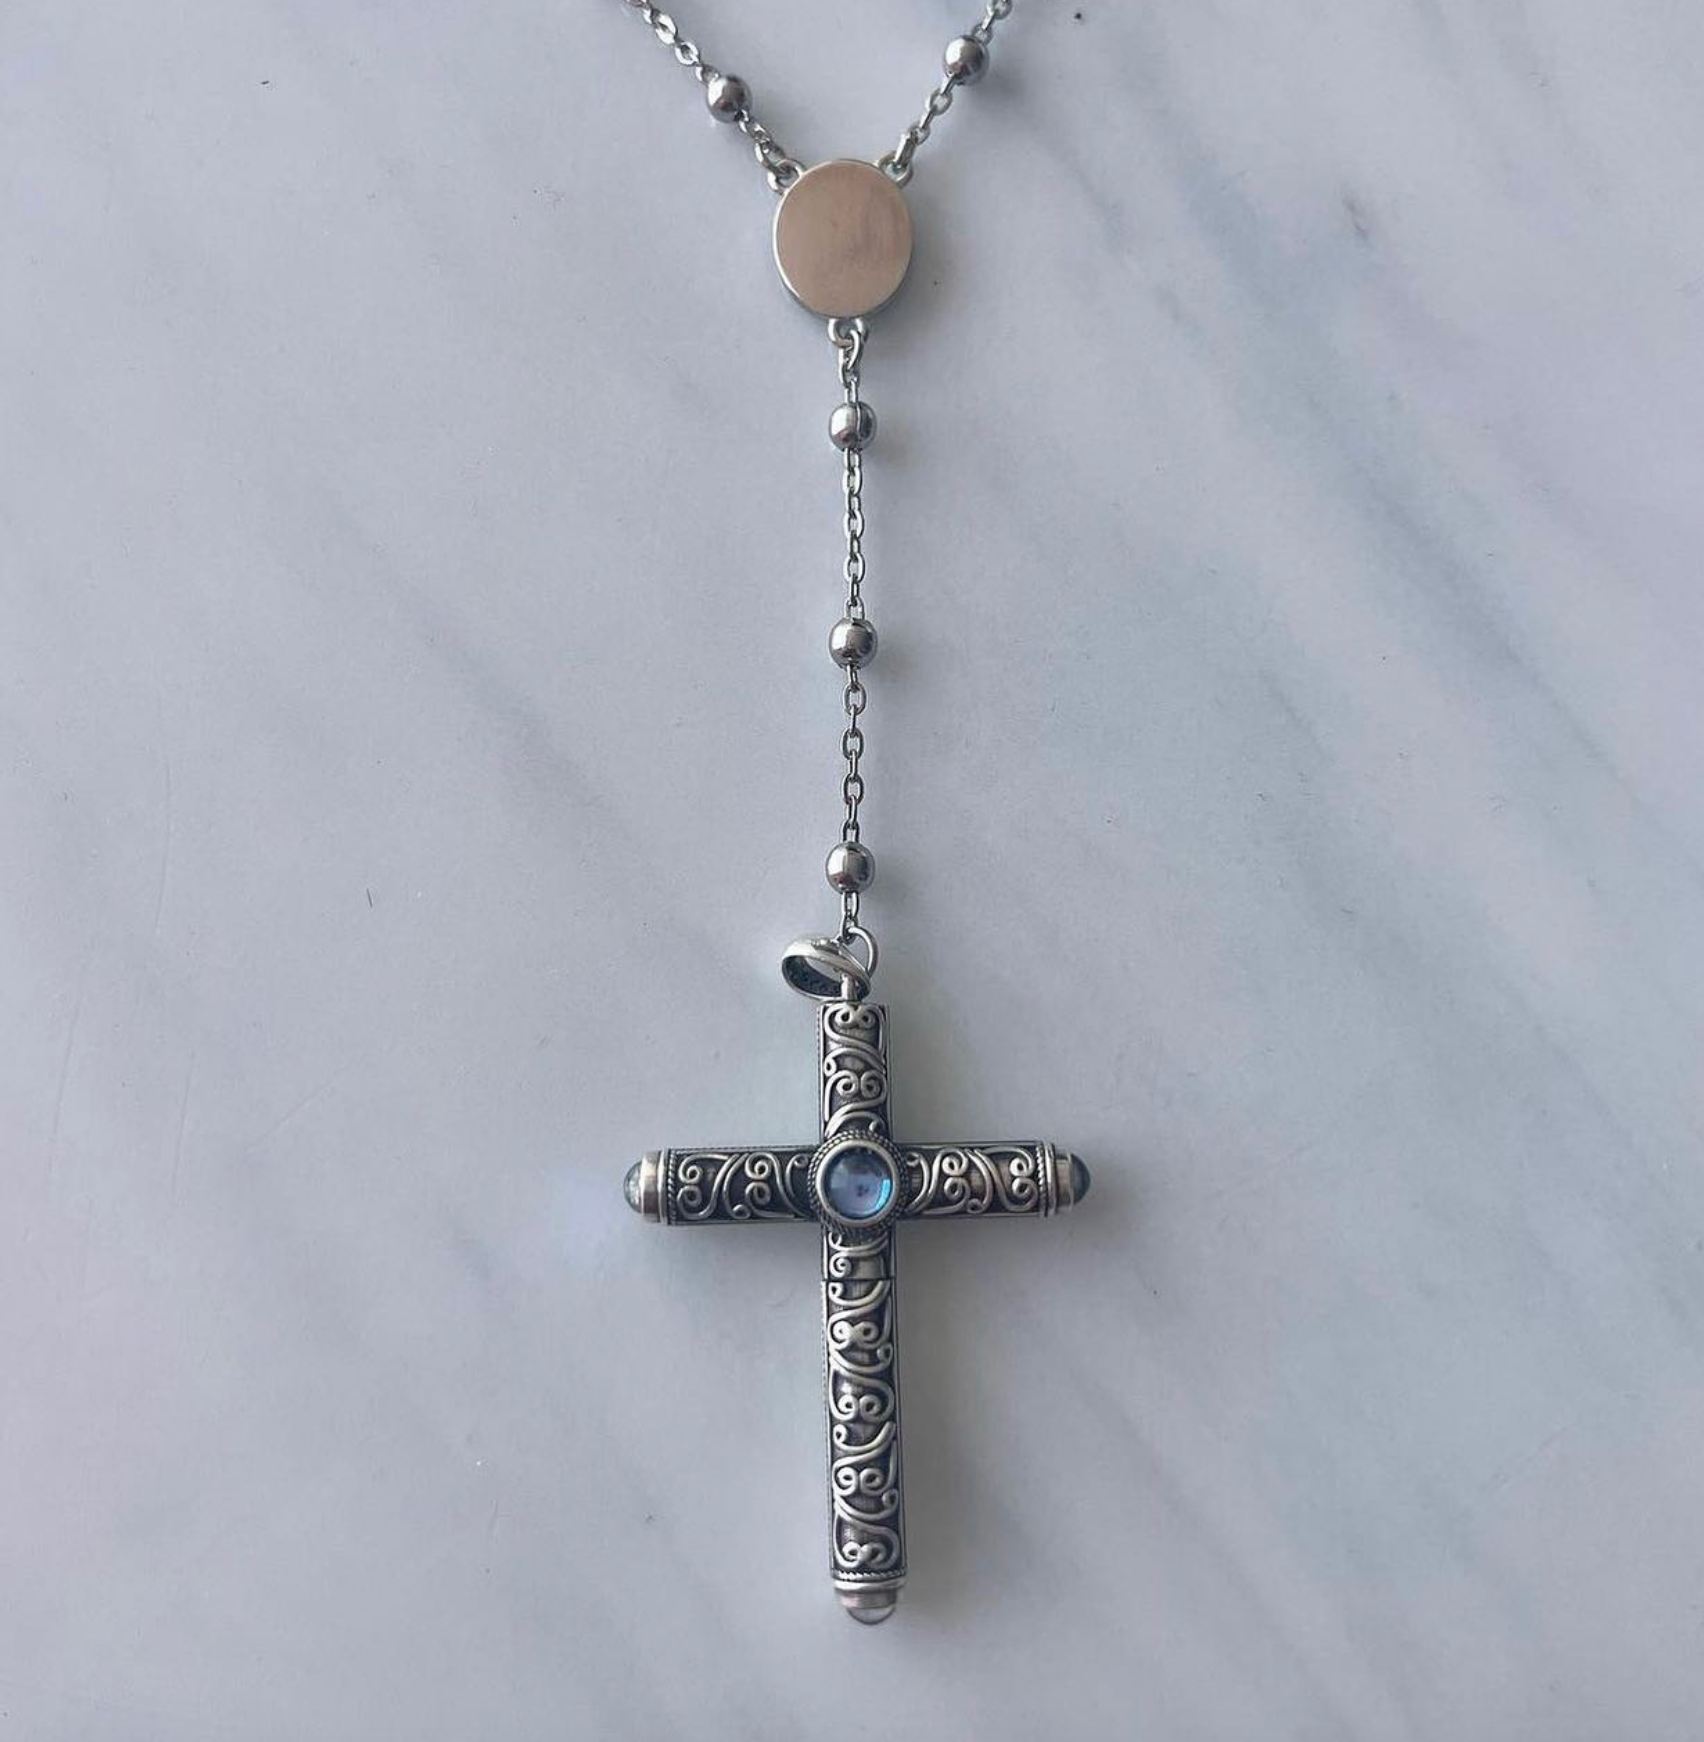 Buy Cruel Intentions Rosary Online In India - Etsy India